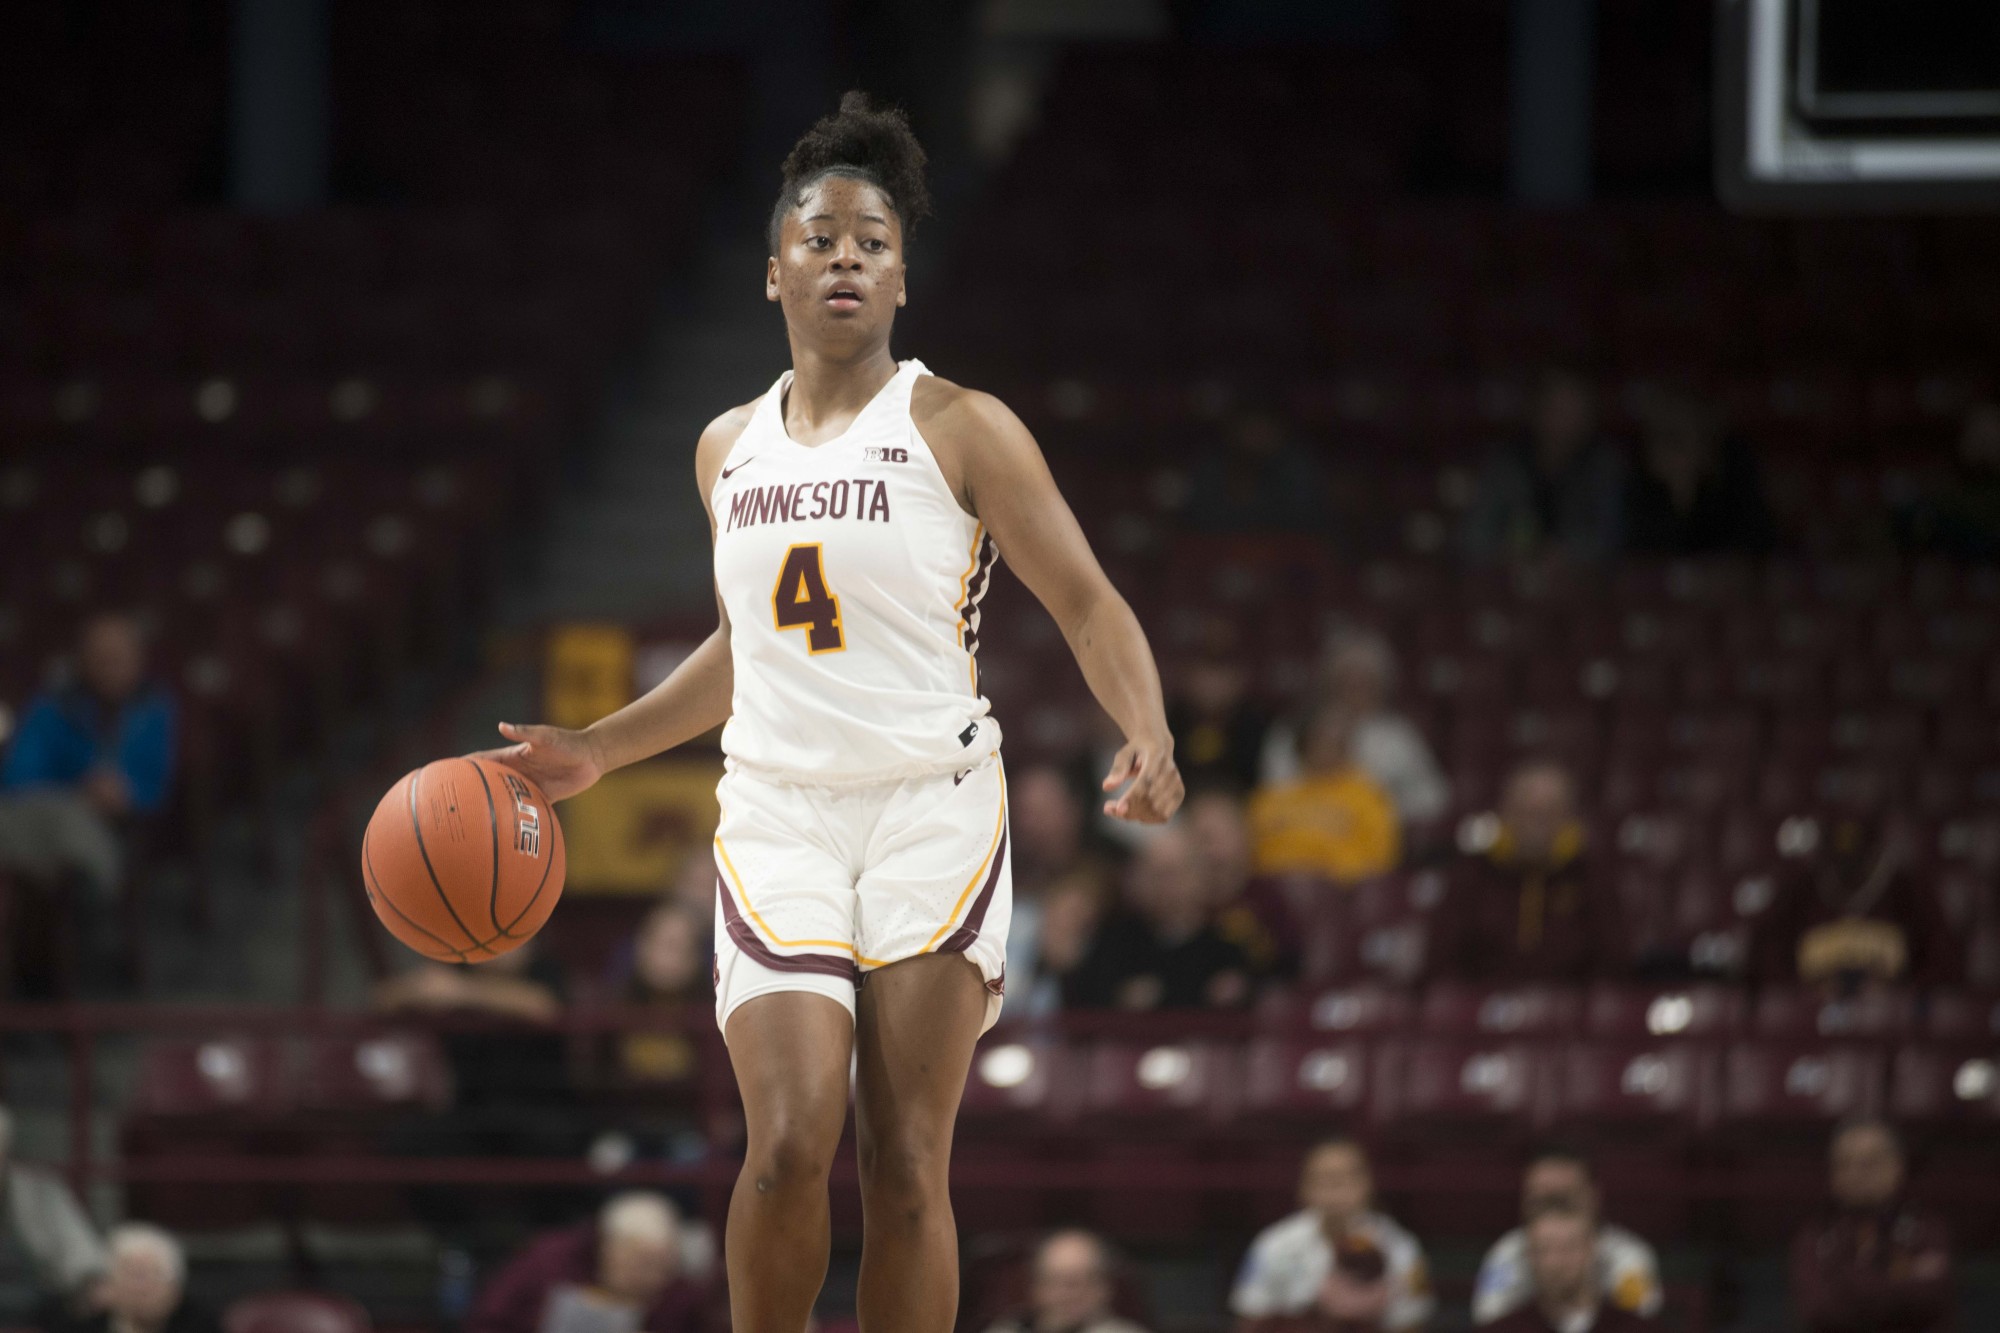 Guard Jasmine Powell approaches her defender at Williams Arena at Williams Arena on Tuesday, Nov. 5, 2019. The Gophers fell to Missouri State 69-77.(Liam Armstrong / Minnesota Daily)